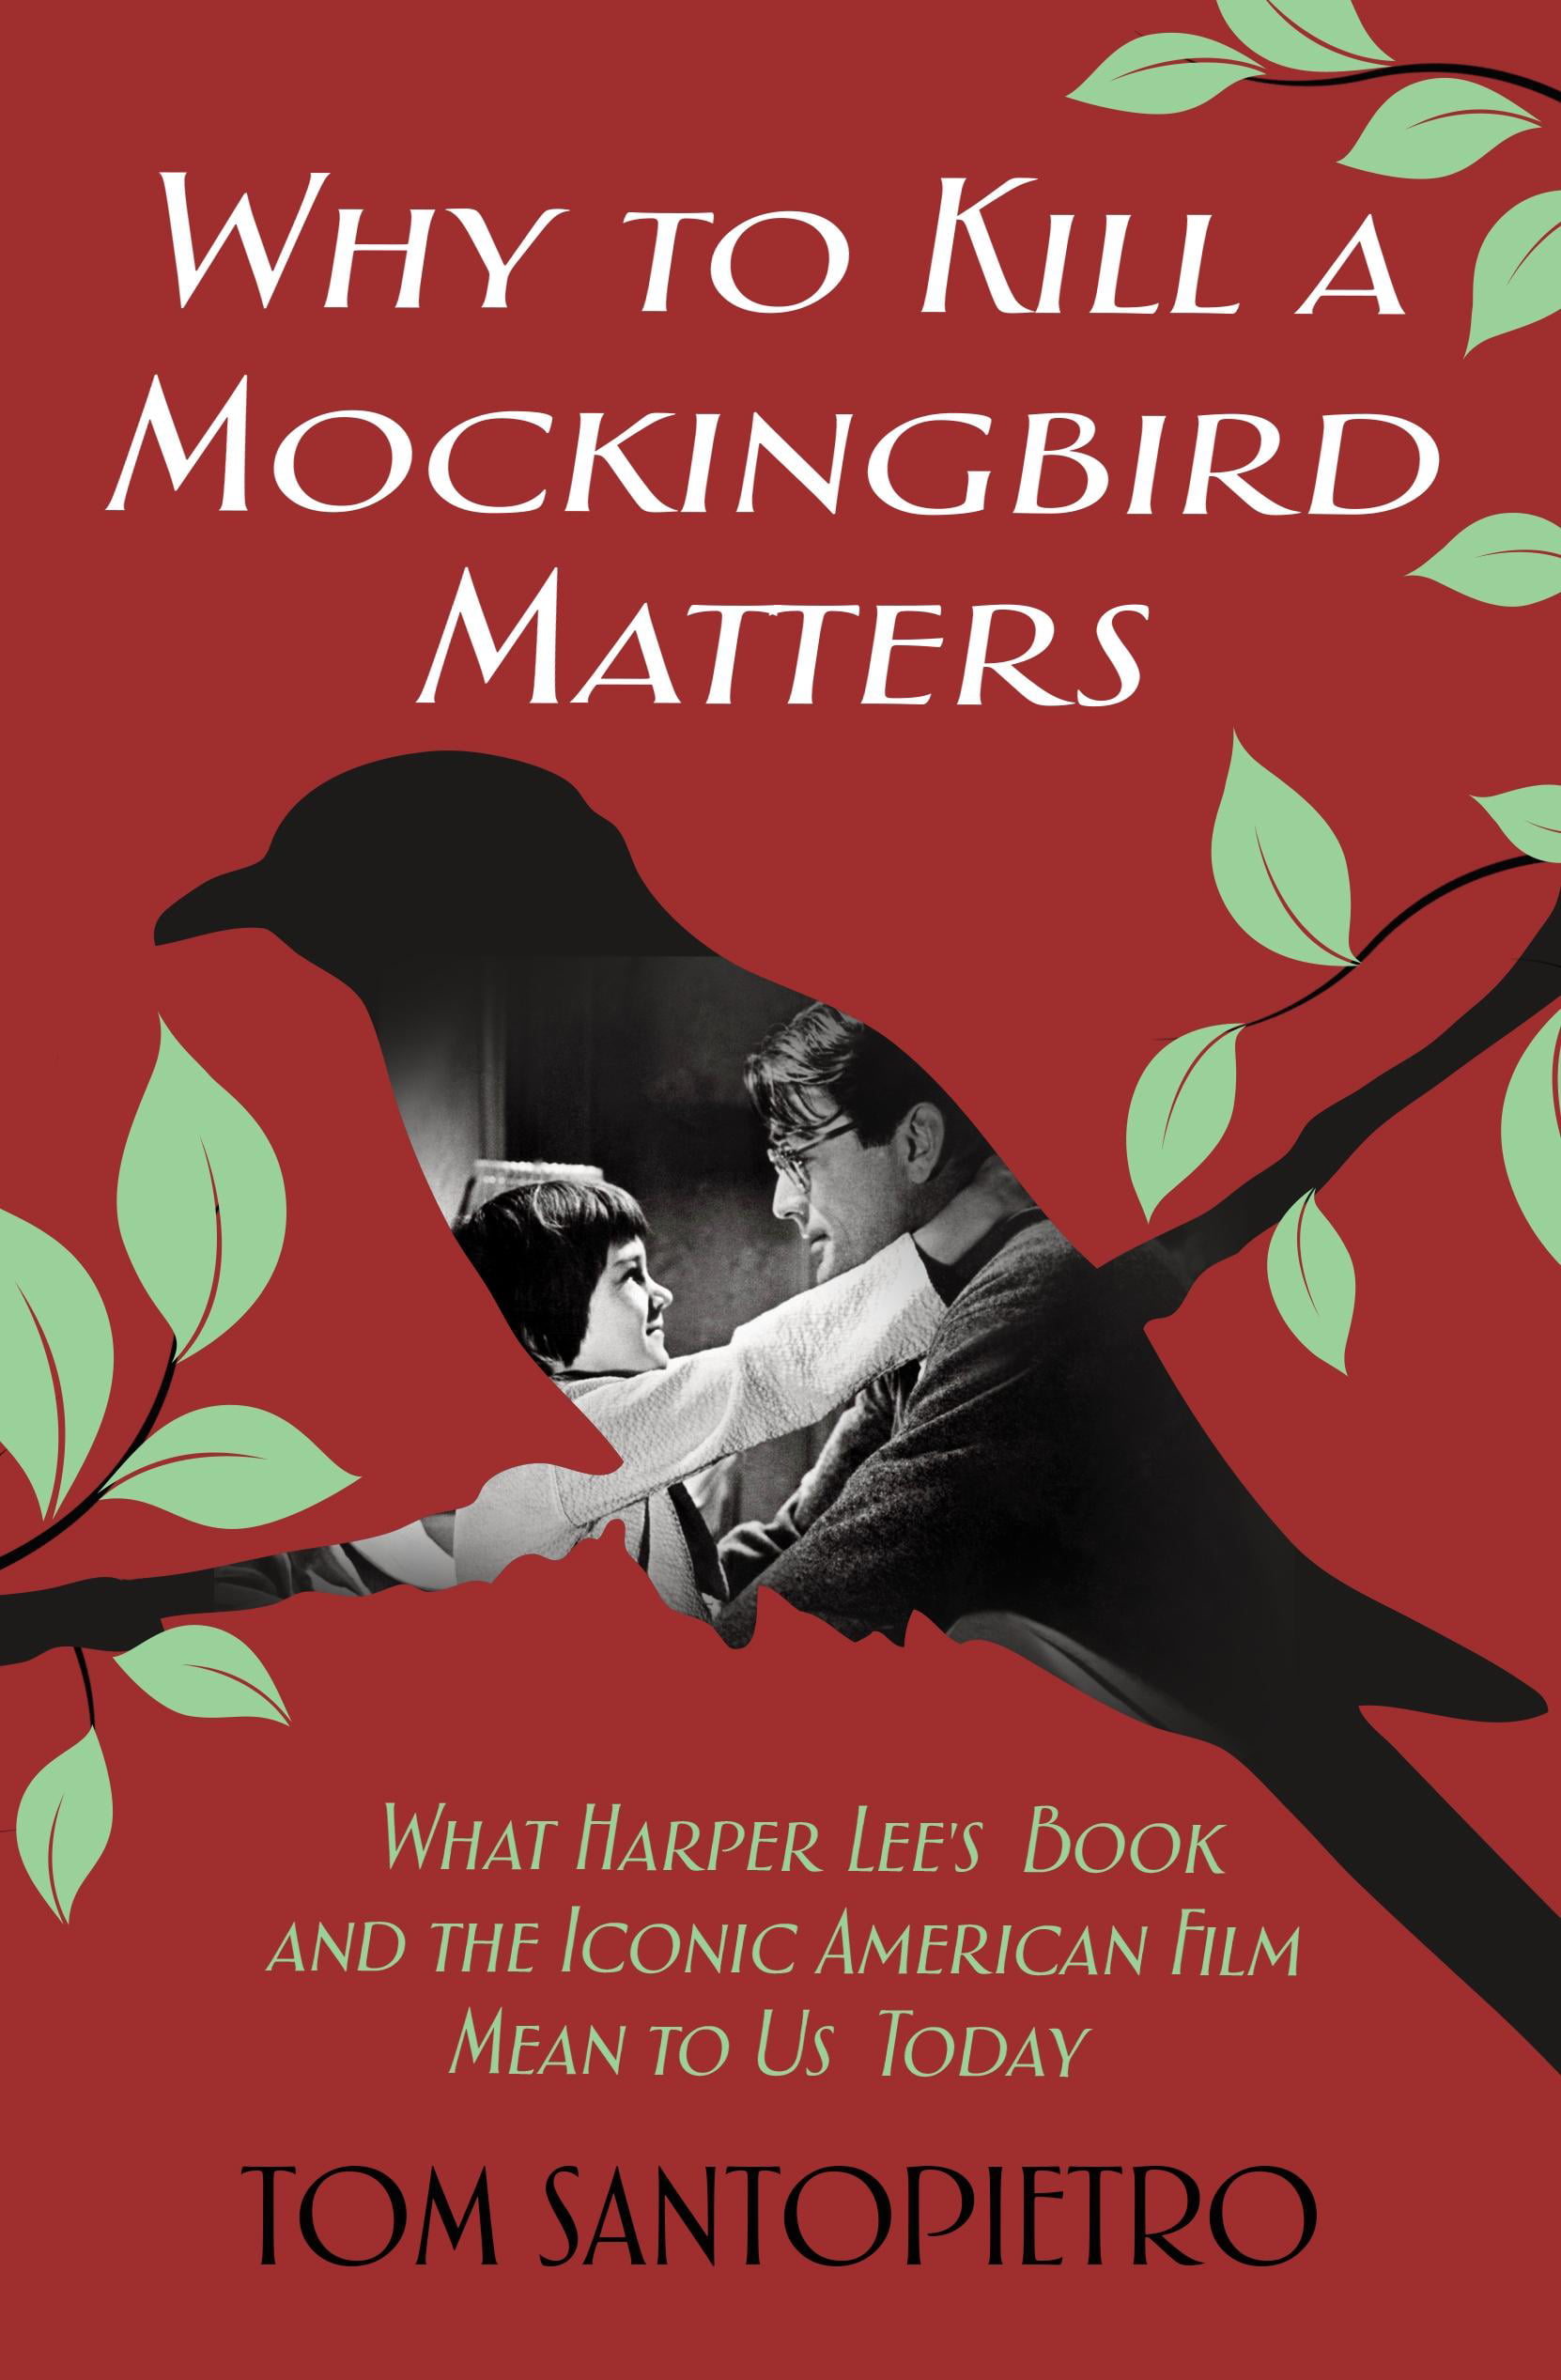 what is the thesis of to kill a mockingbird